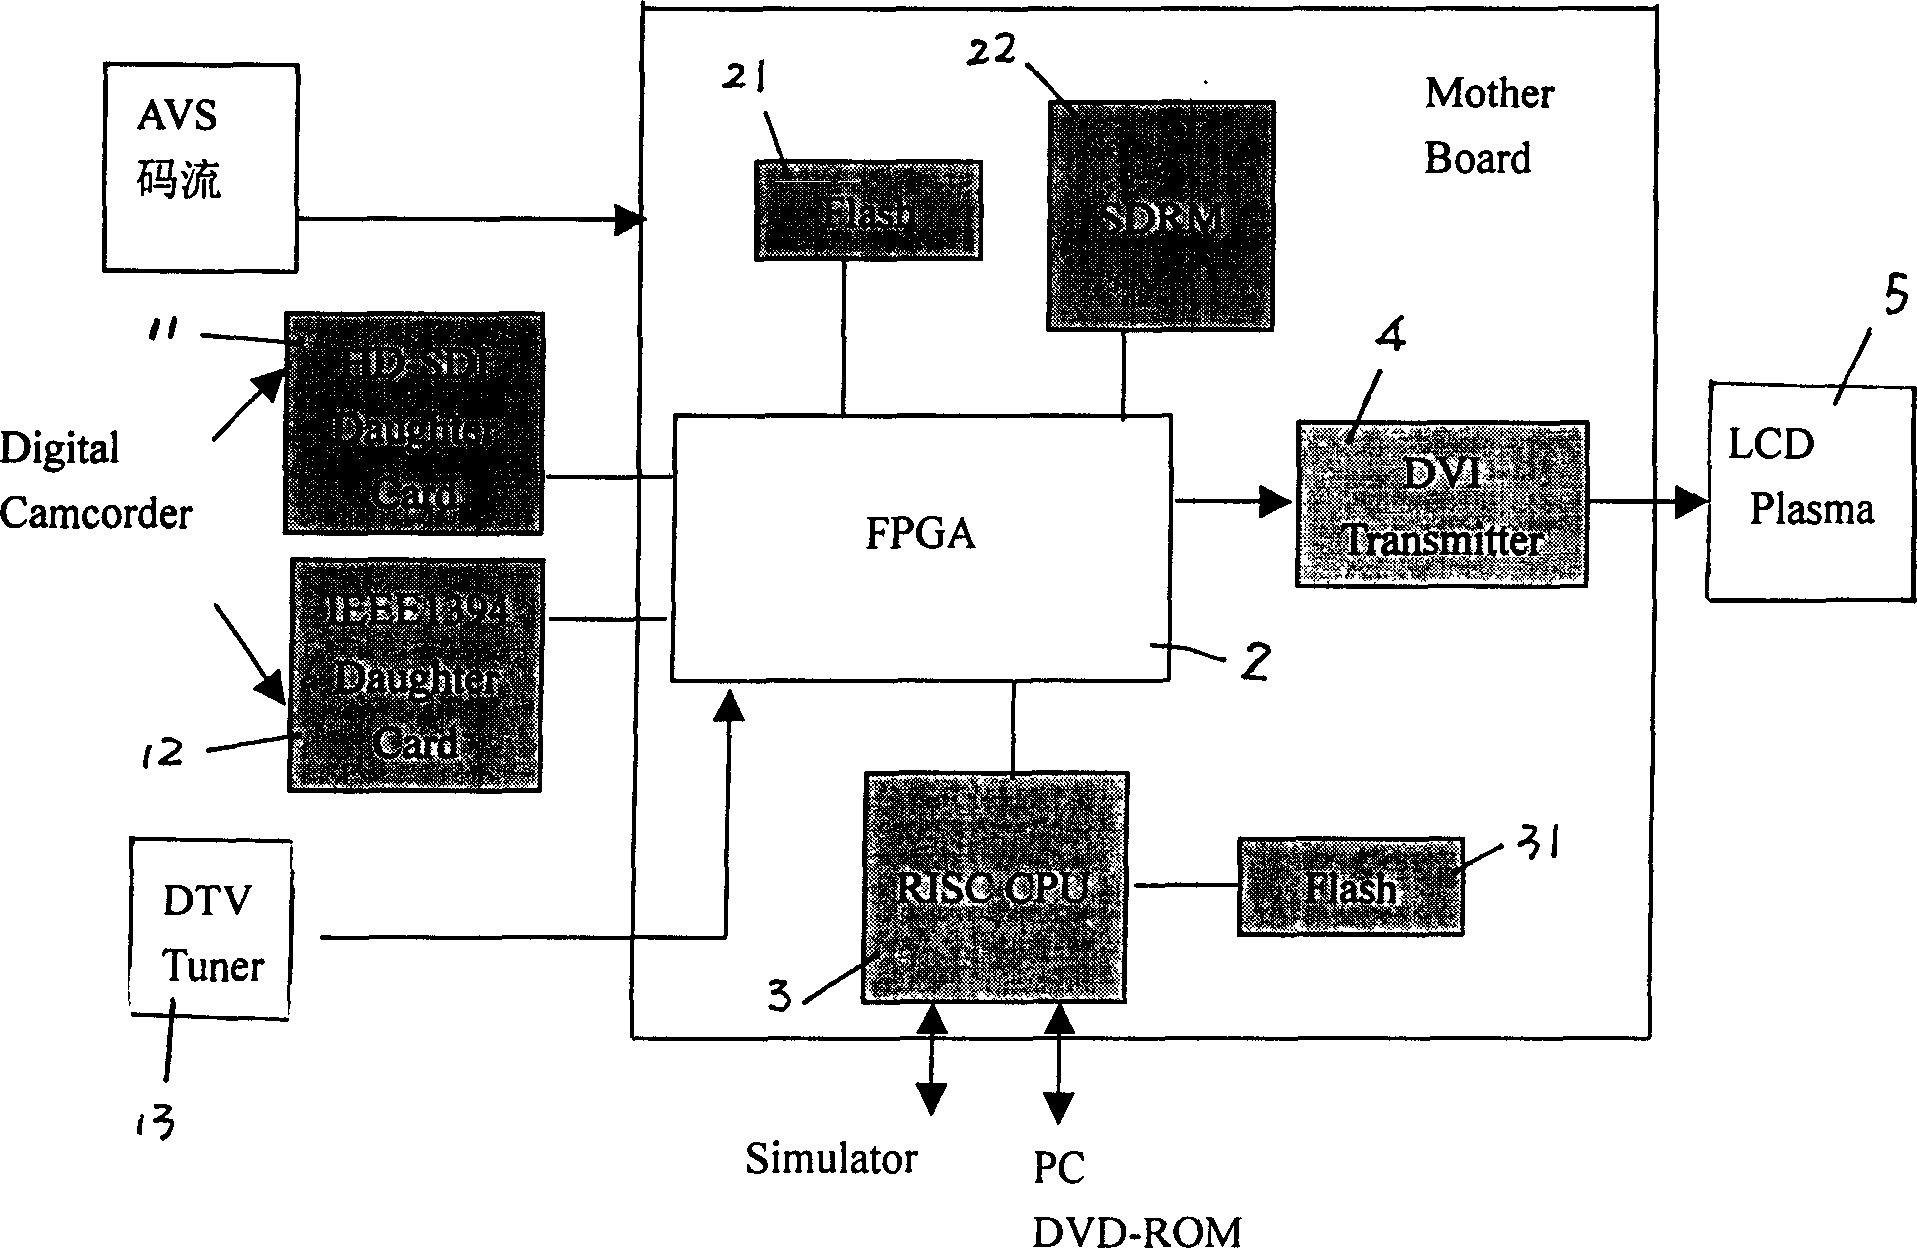 Method and apparatus for decoding and verifying AVS video frequency